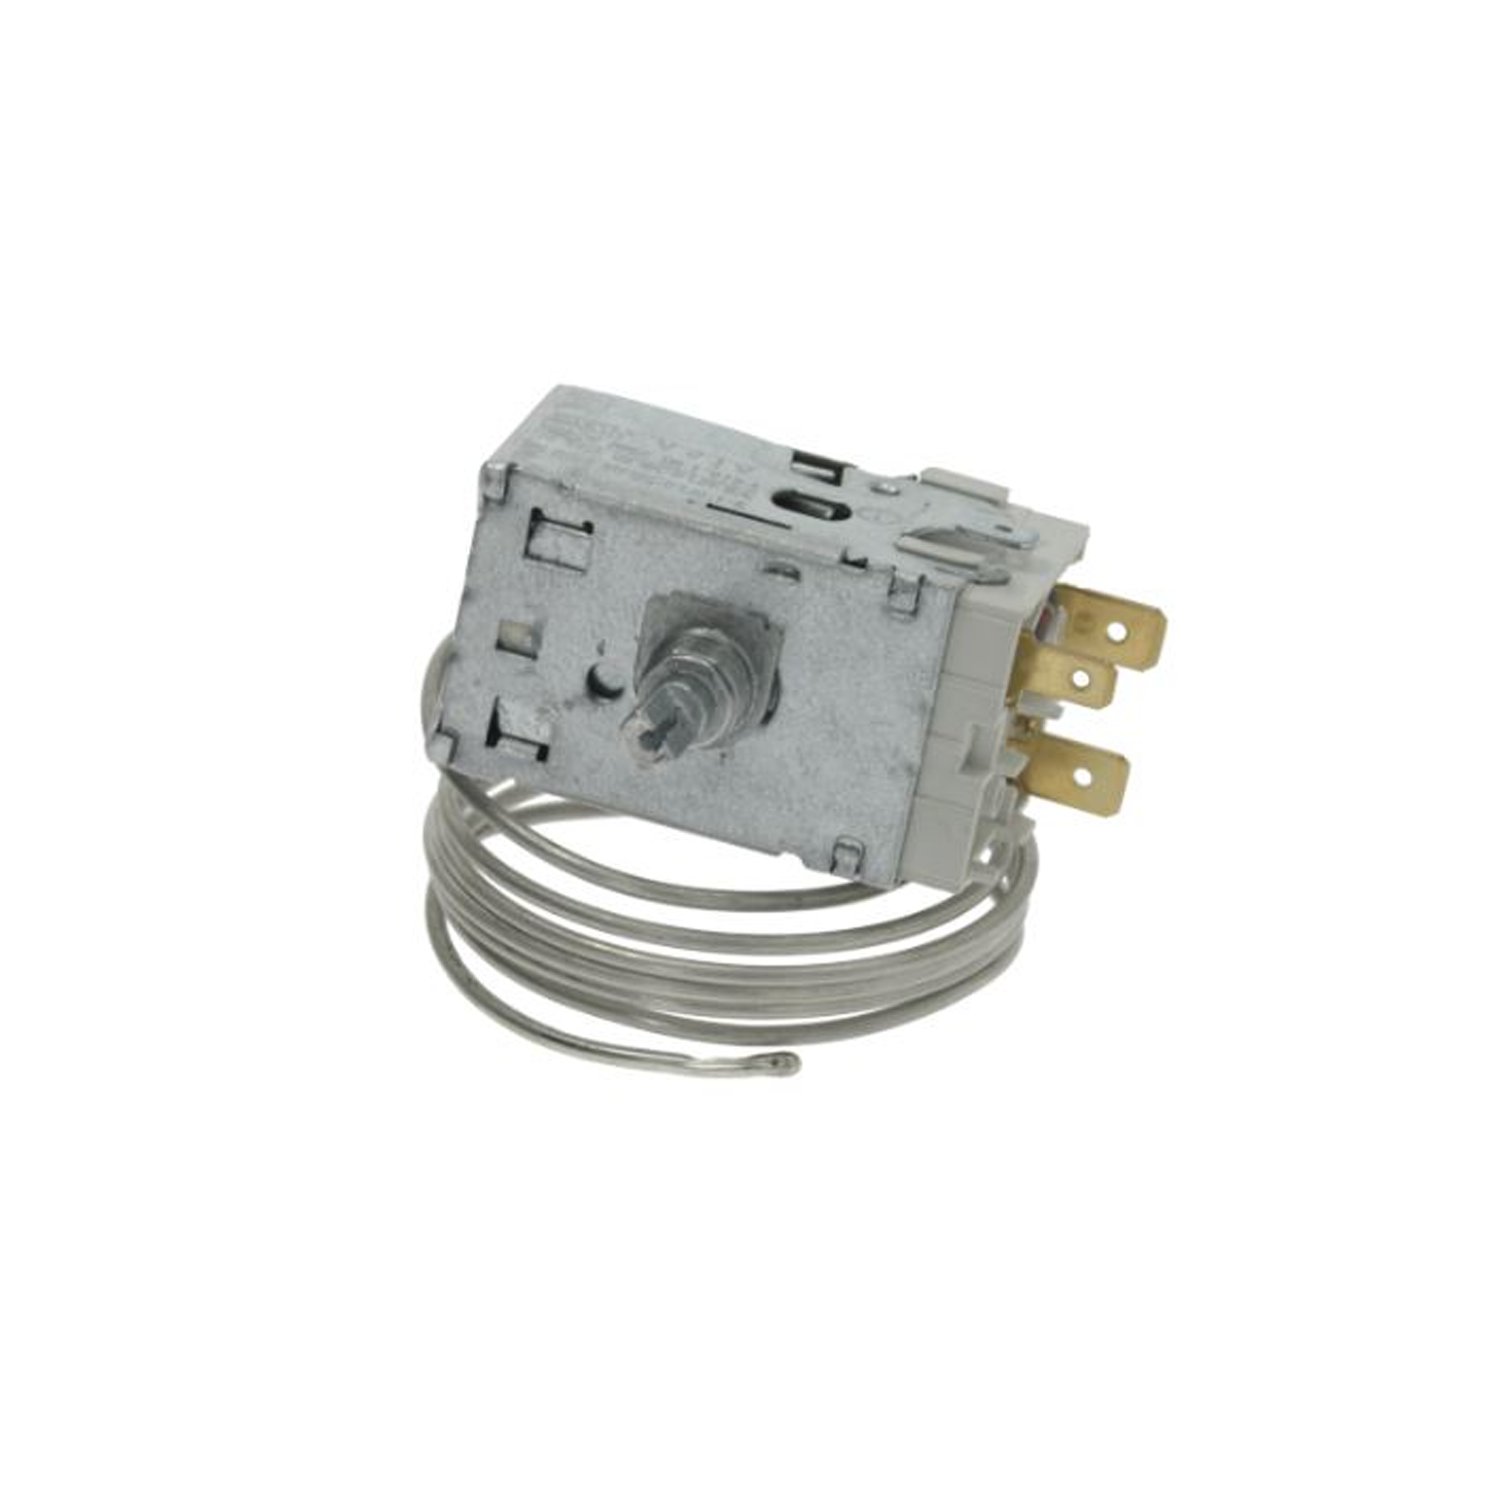 Thermostat Atea A13-0063 for refrigerator, min. 4.5 ° C, max. 30 ° C, switching value 4.5 ° C, L 1000 mm, 4.8mm AMP